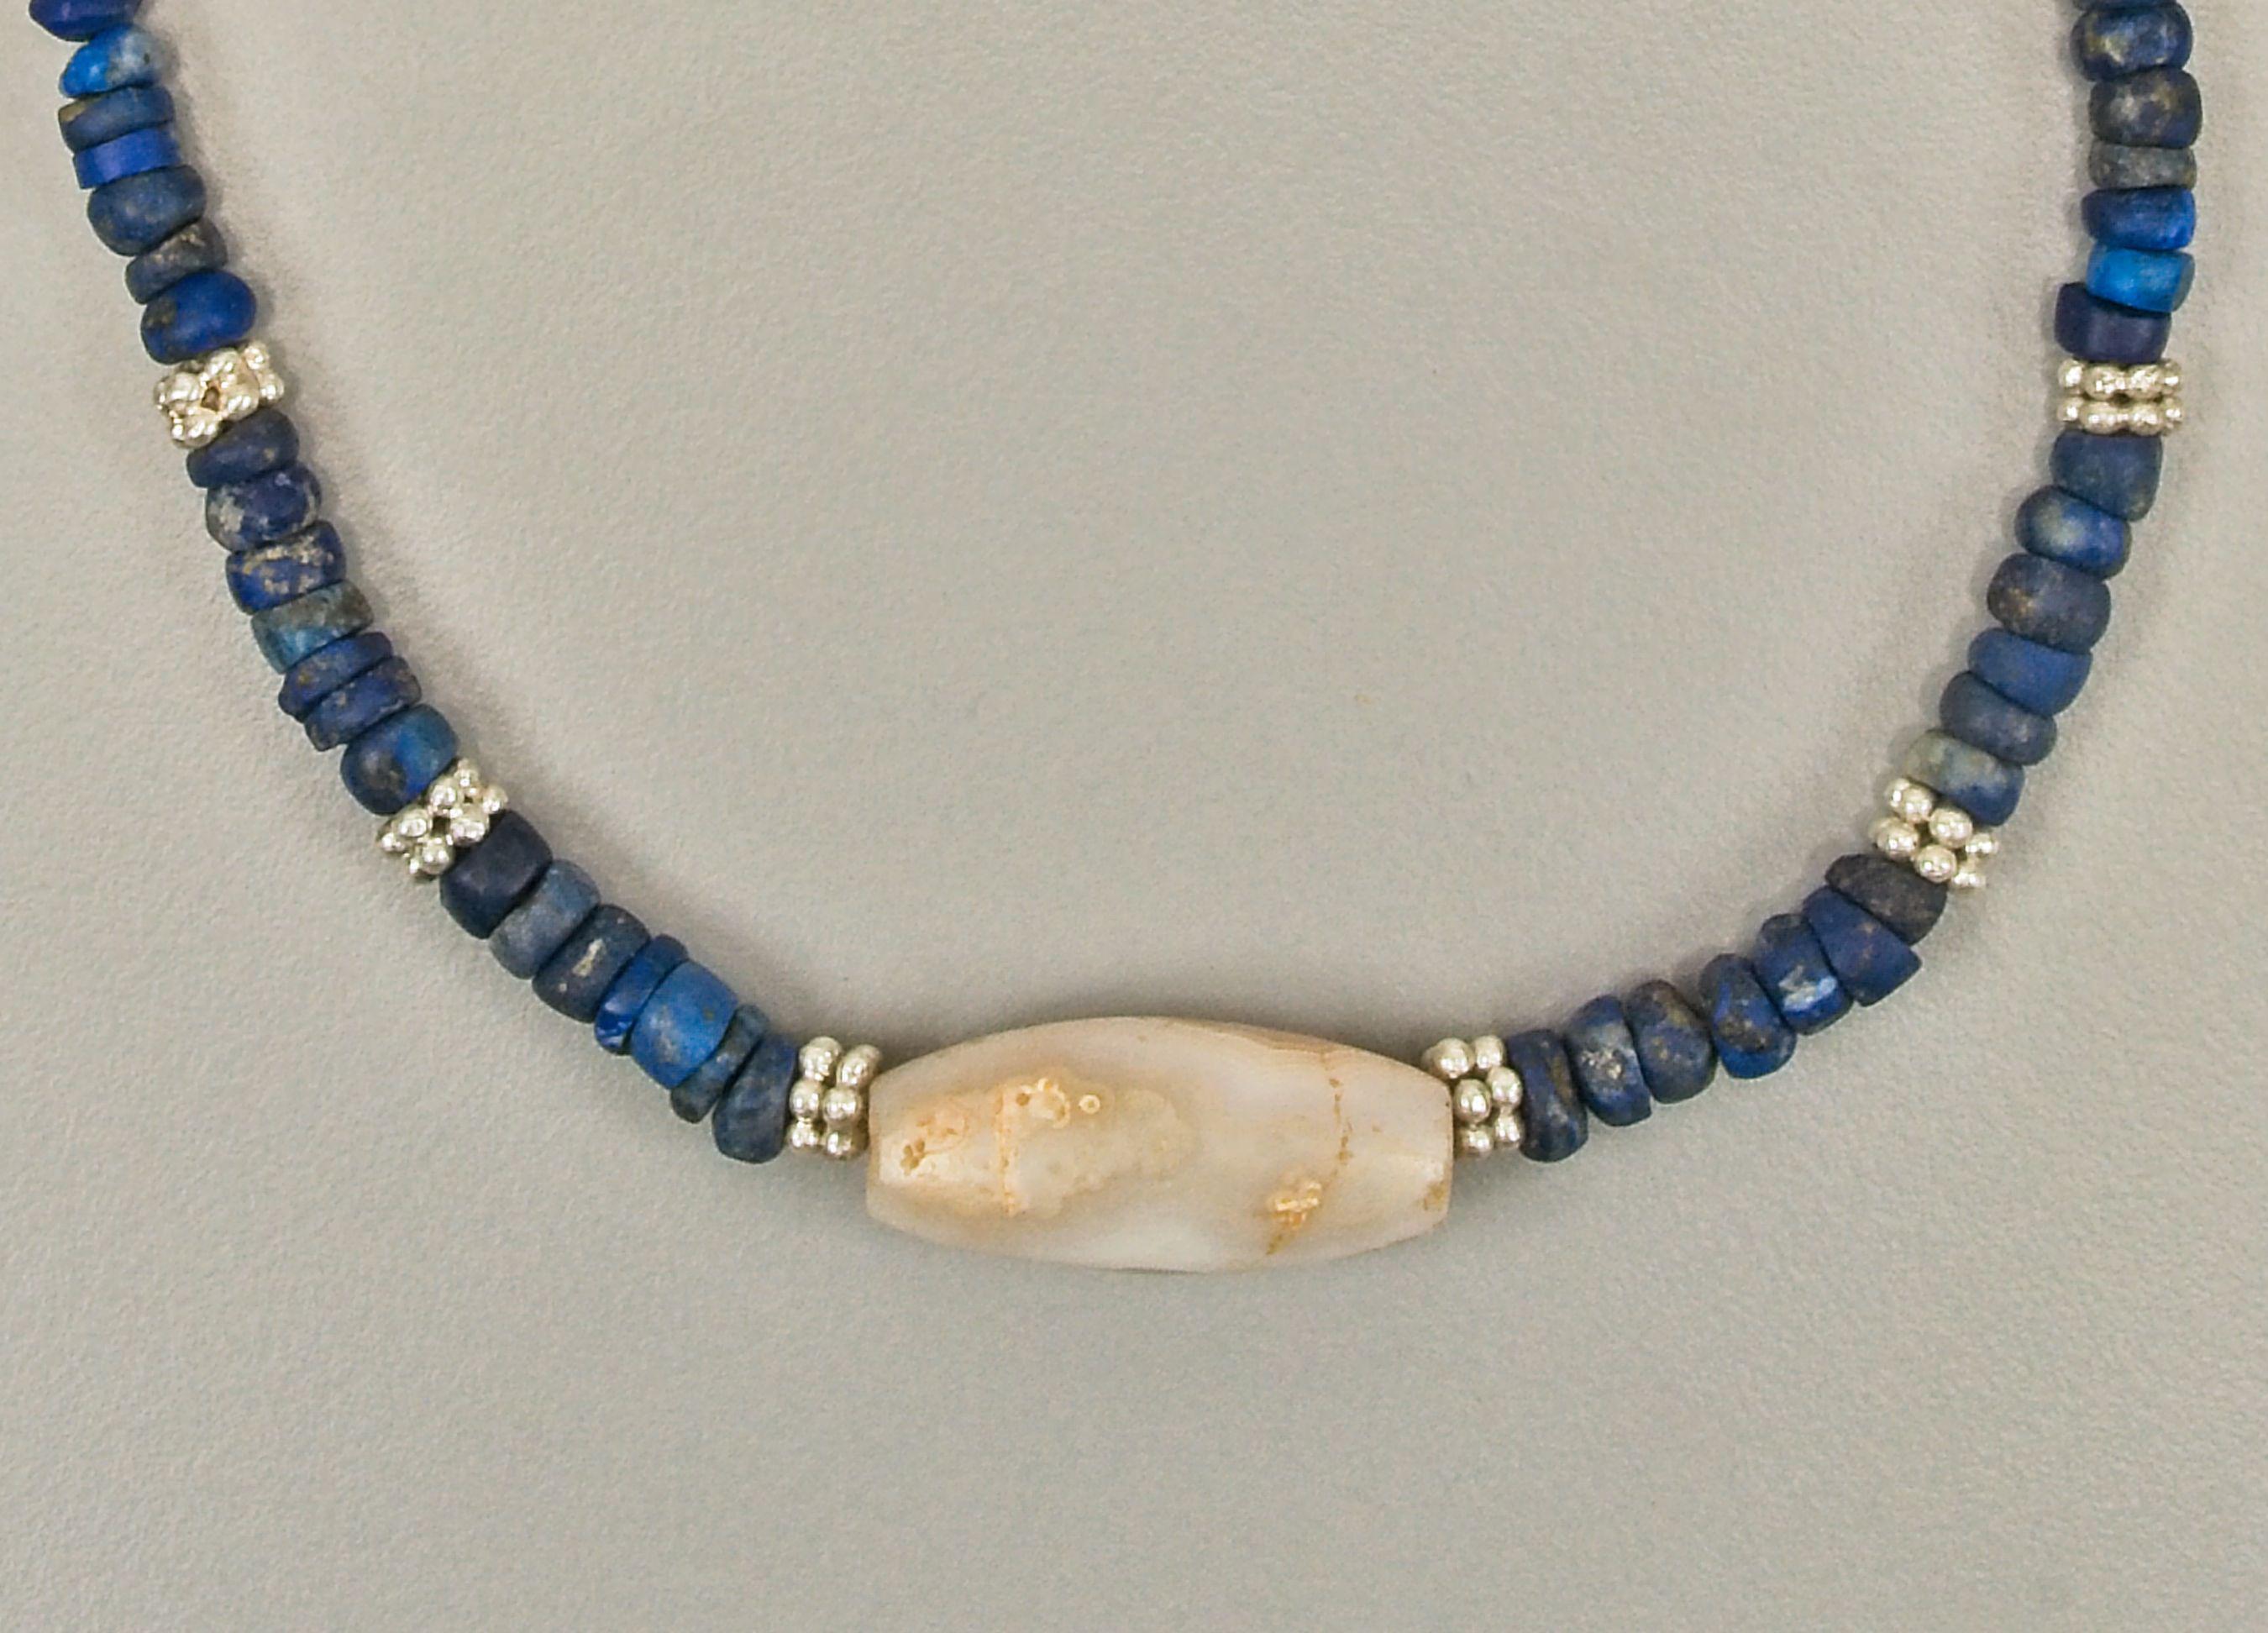 Ninety lapis lazuli beads, with a white milky quartz barrel shaped bead at the center. The center bead is faced with two silver beads made of two layers of six grains in a hexagonal pattern. There are ten more of these beads evenly spaced throughout